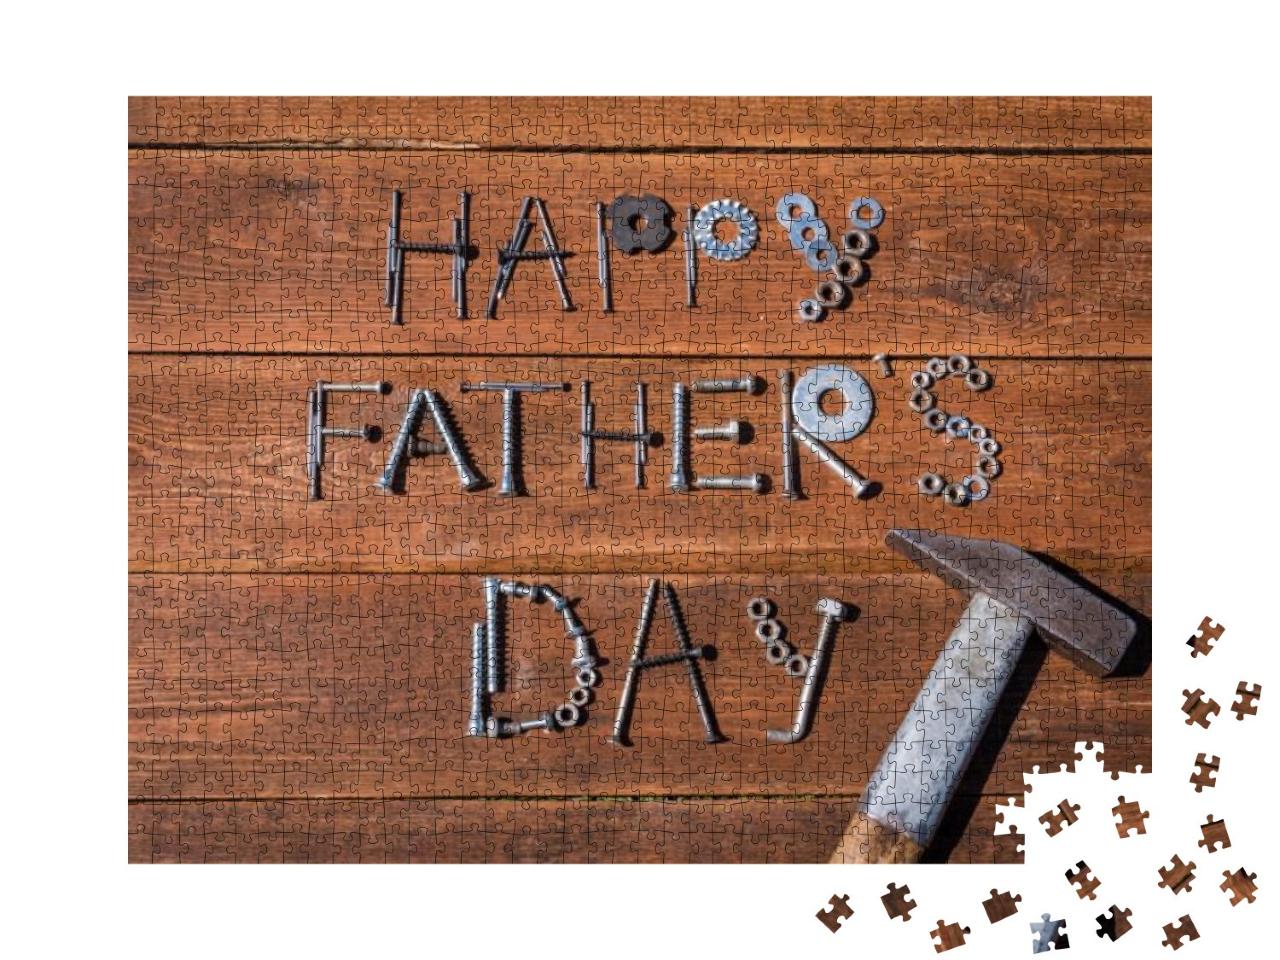 Happy Fathers Day. Greeting Card Made of Metallic... Jigsaw Puzzle with 1000 pieces